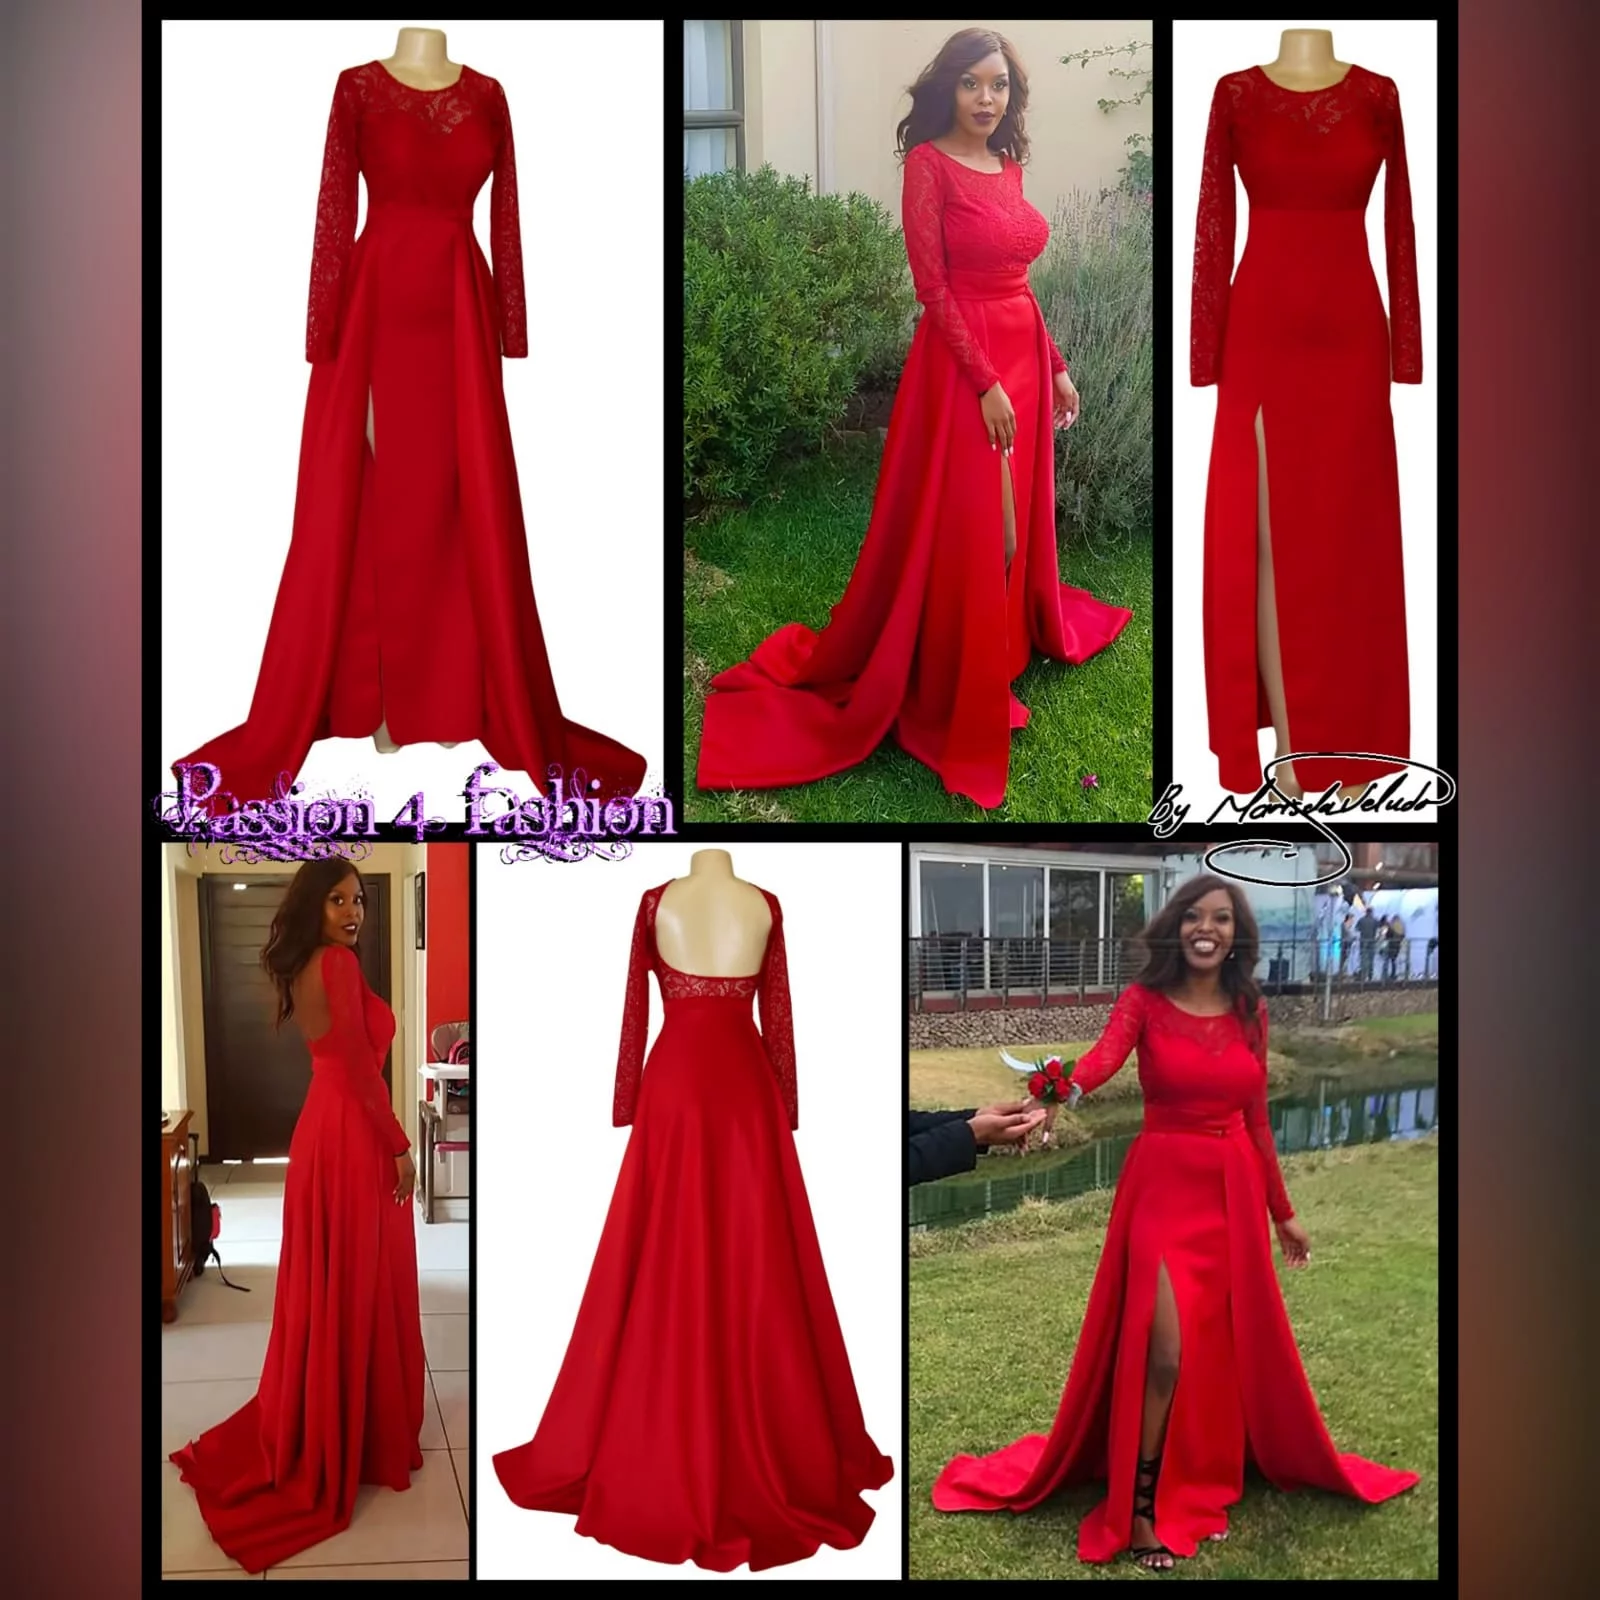 Straight cut deep red open back gala dress 4 straight cut deep red open back gala dress. With a lace bodice, long lace sleeves and a slit. With a detachable train.